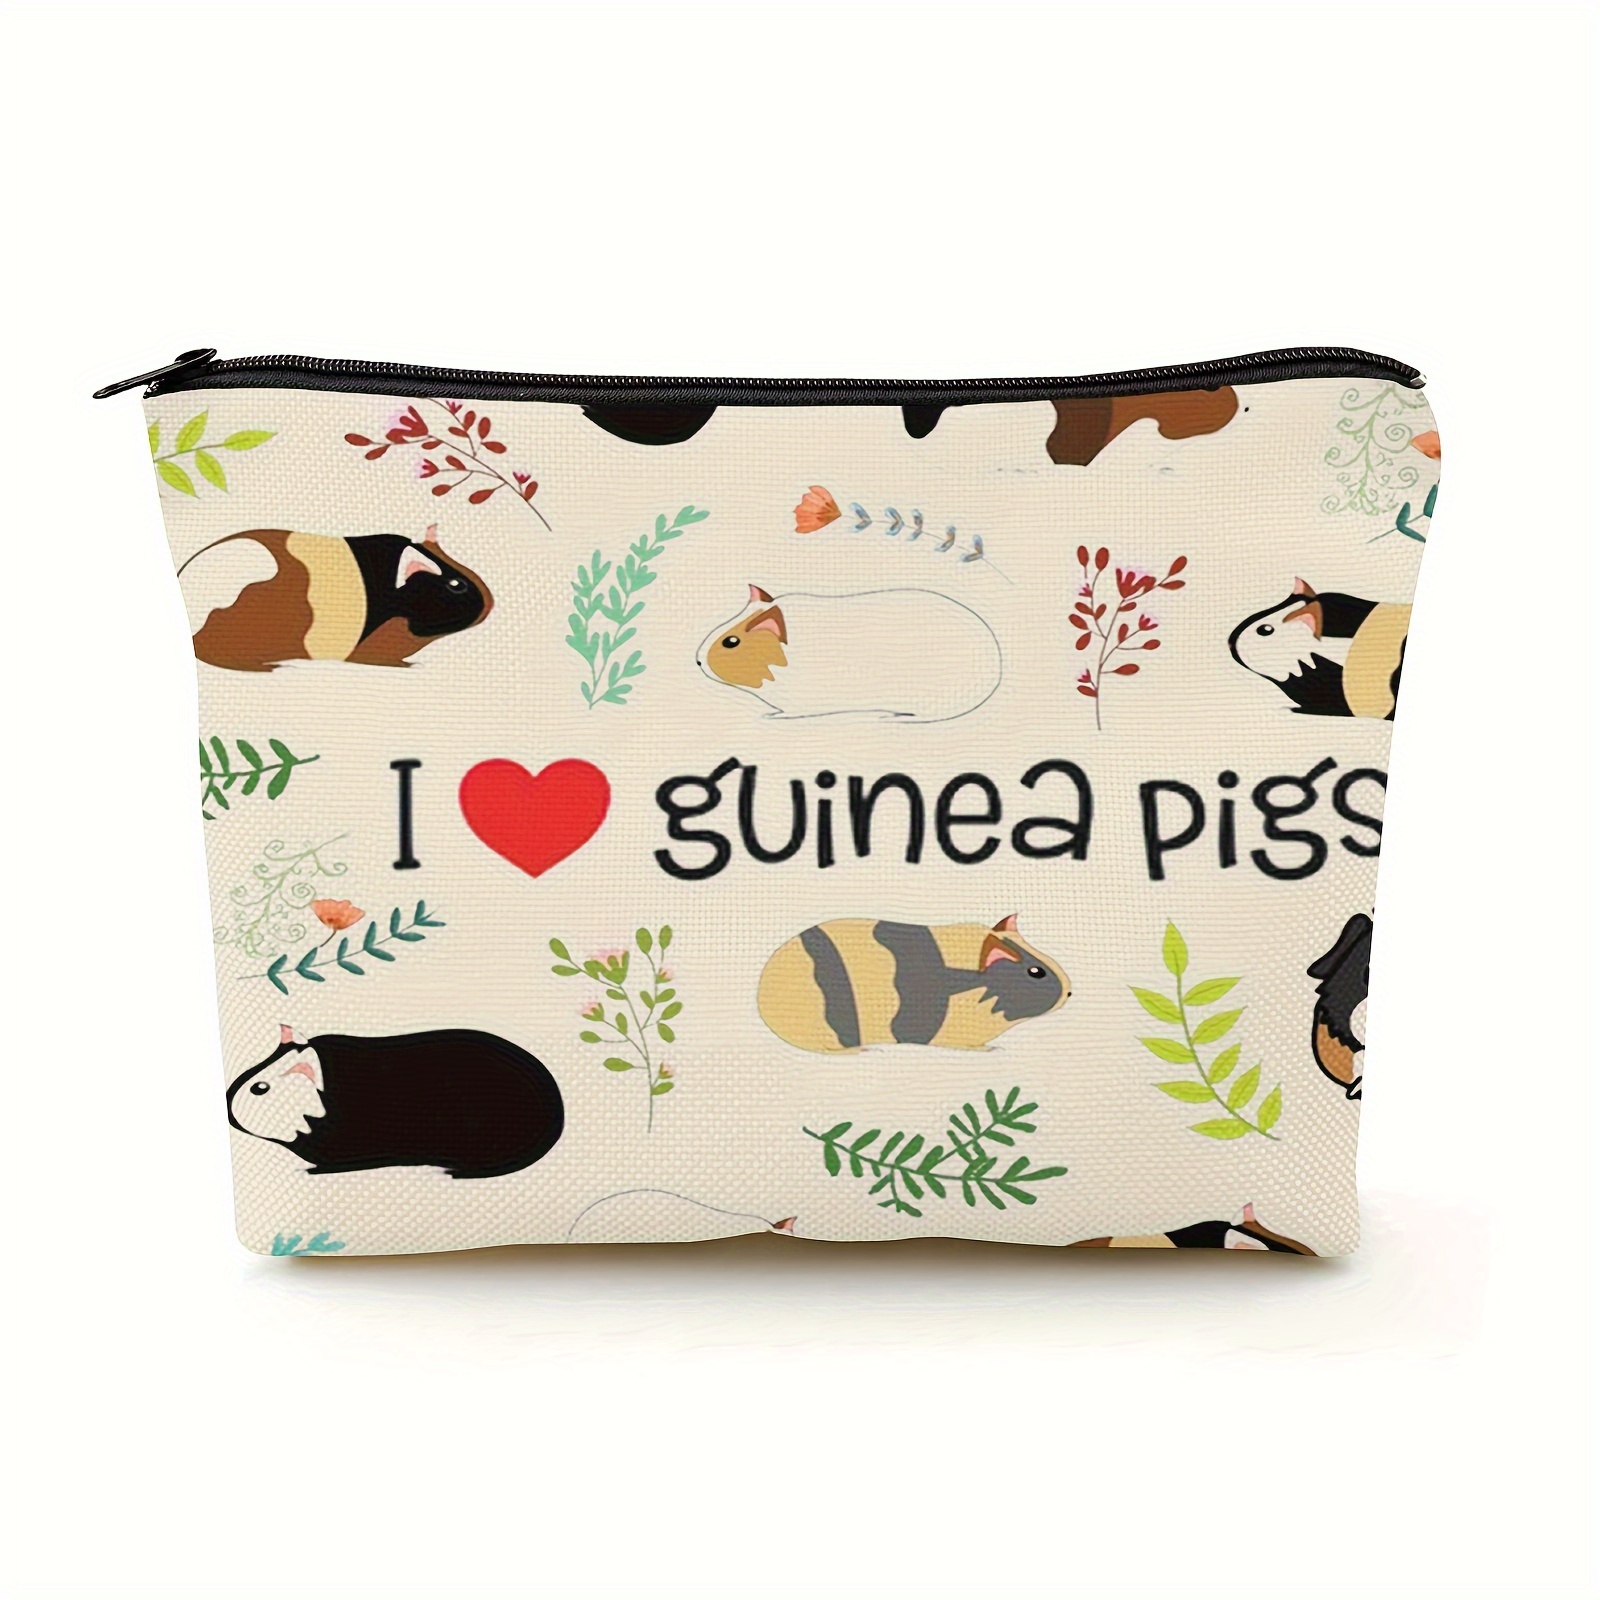 

Guinea Pig Lovers Cosmetic Pouch, "i Love Guinea Pigs" Print, Cute Animal Design, Zipper Makeup Bag With Water-resistant Lining, Portable Multi-purpose Organizer